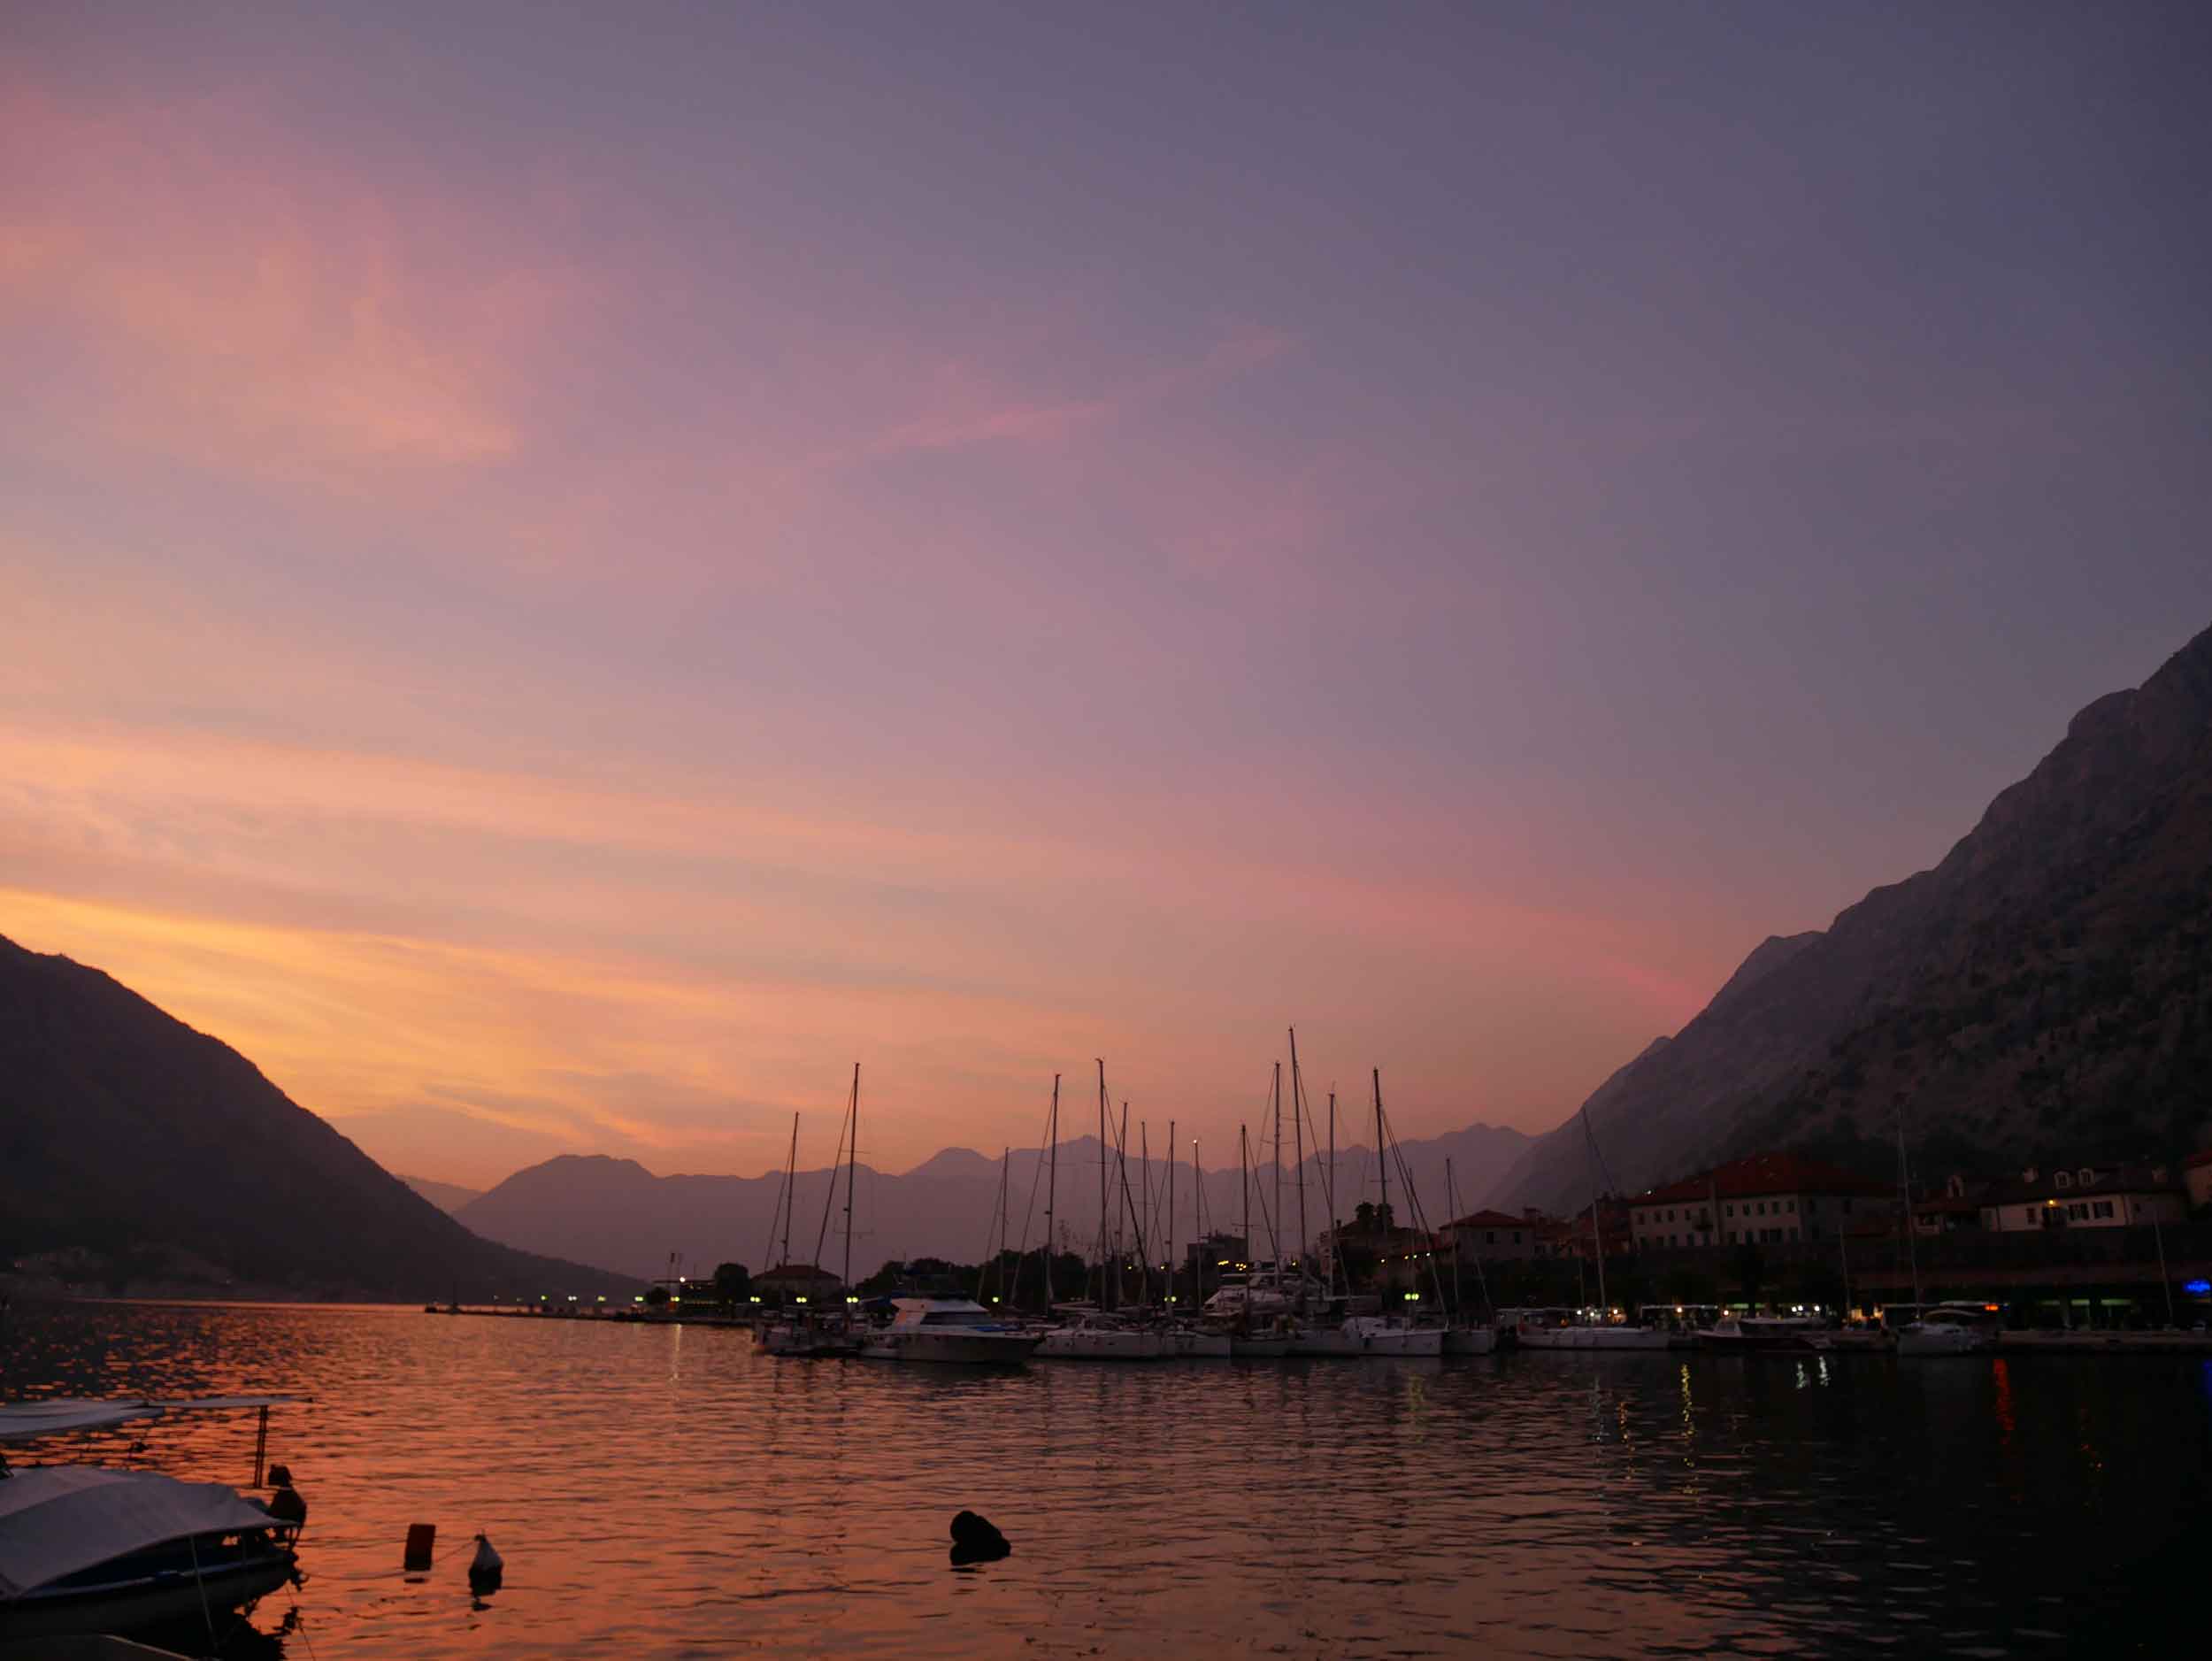  The winding 28 kilometre long Bay of Kotor produced some magical vibrant sunsets.&nbsp; 